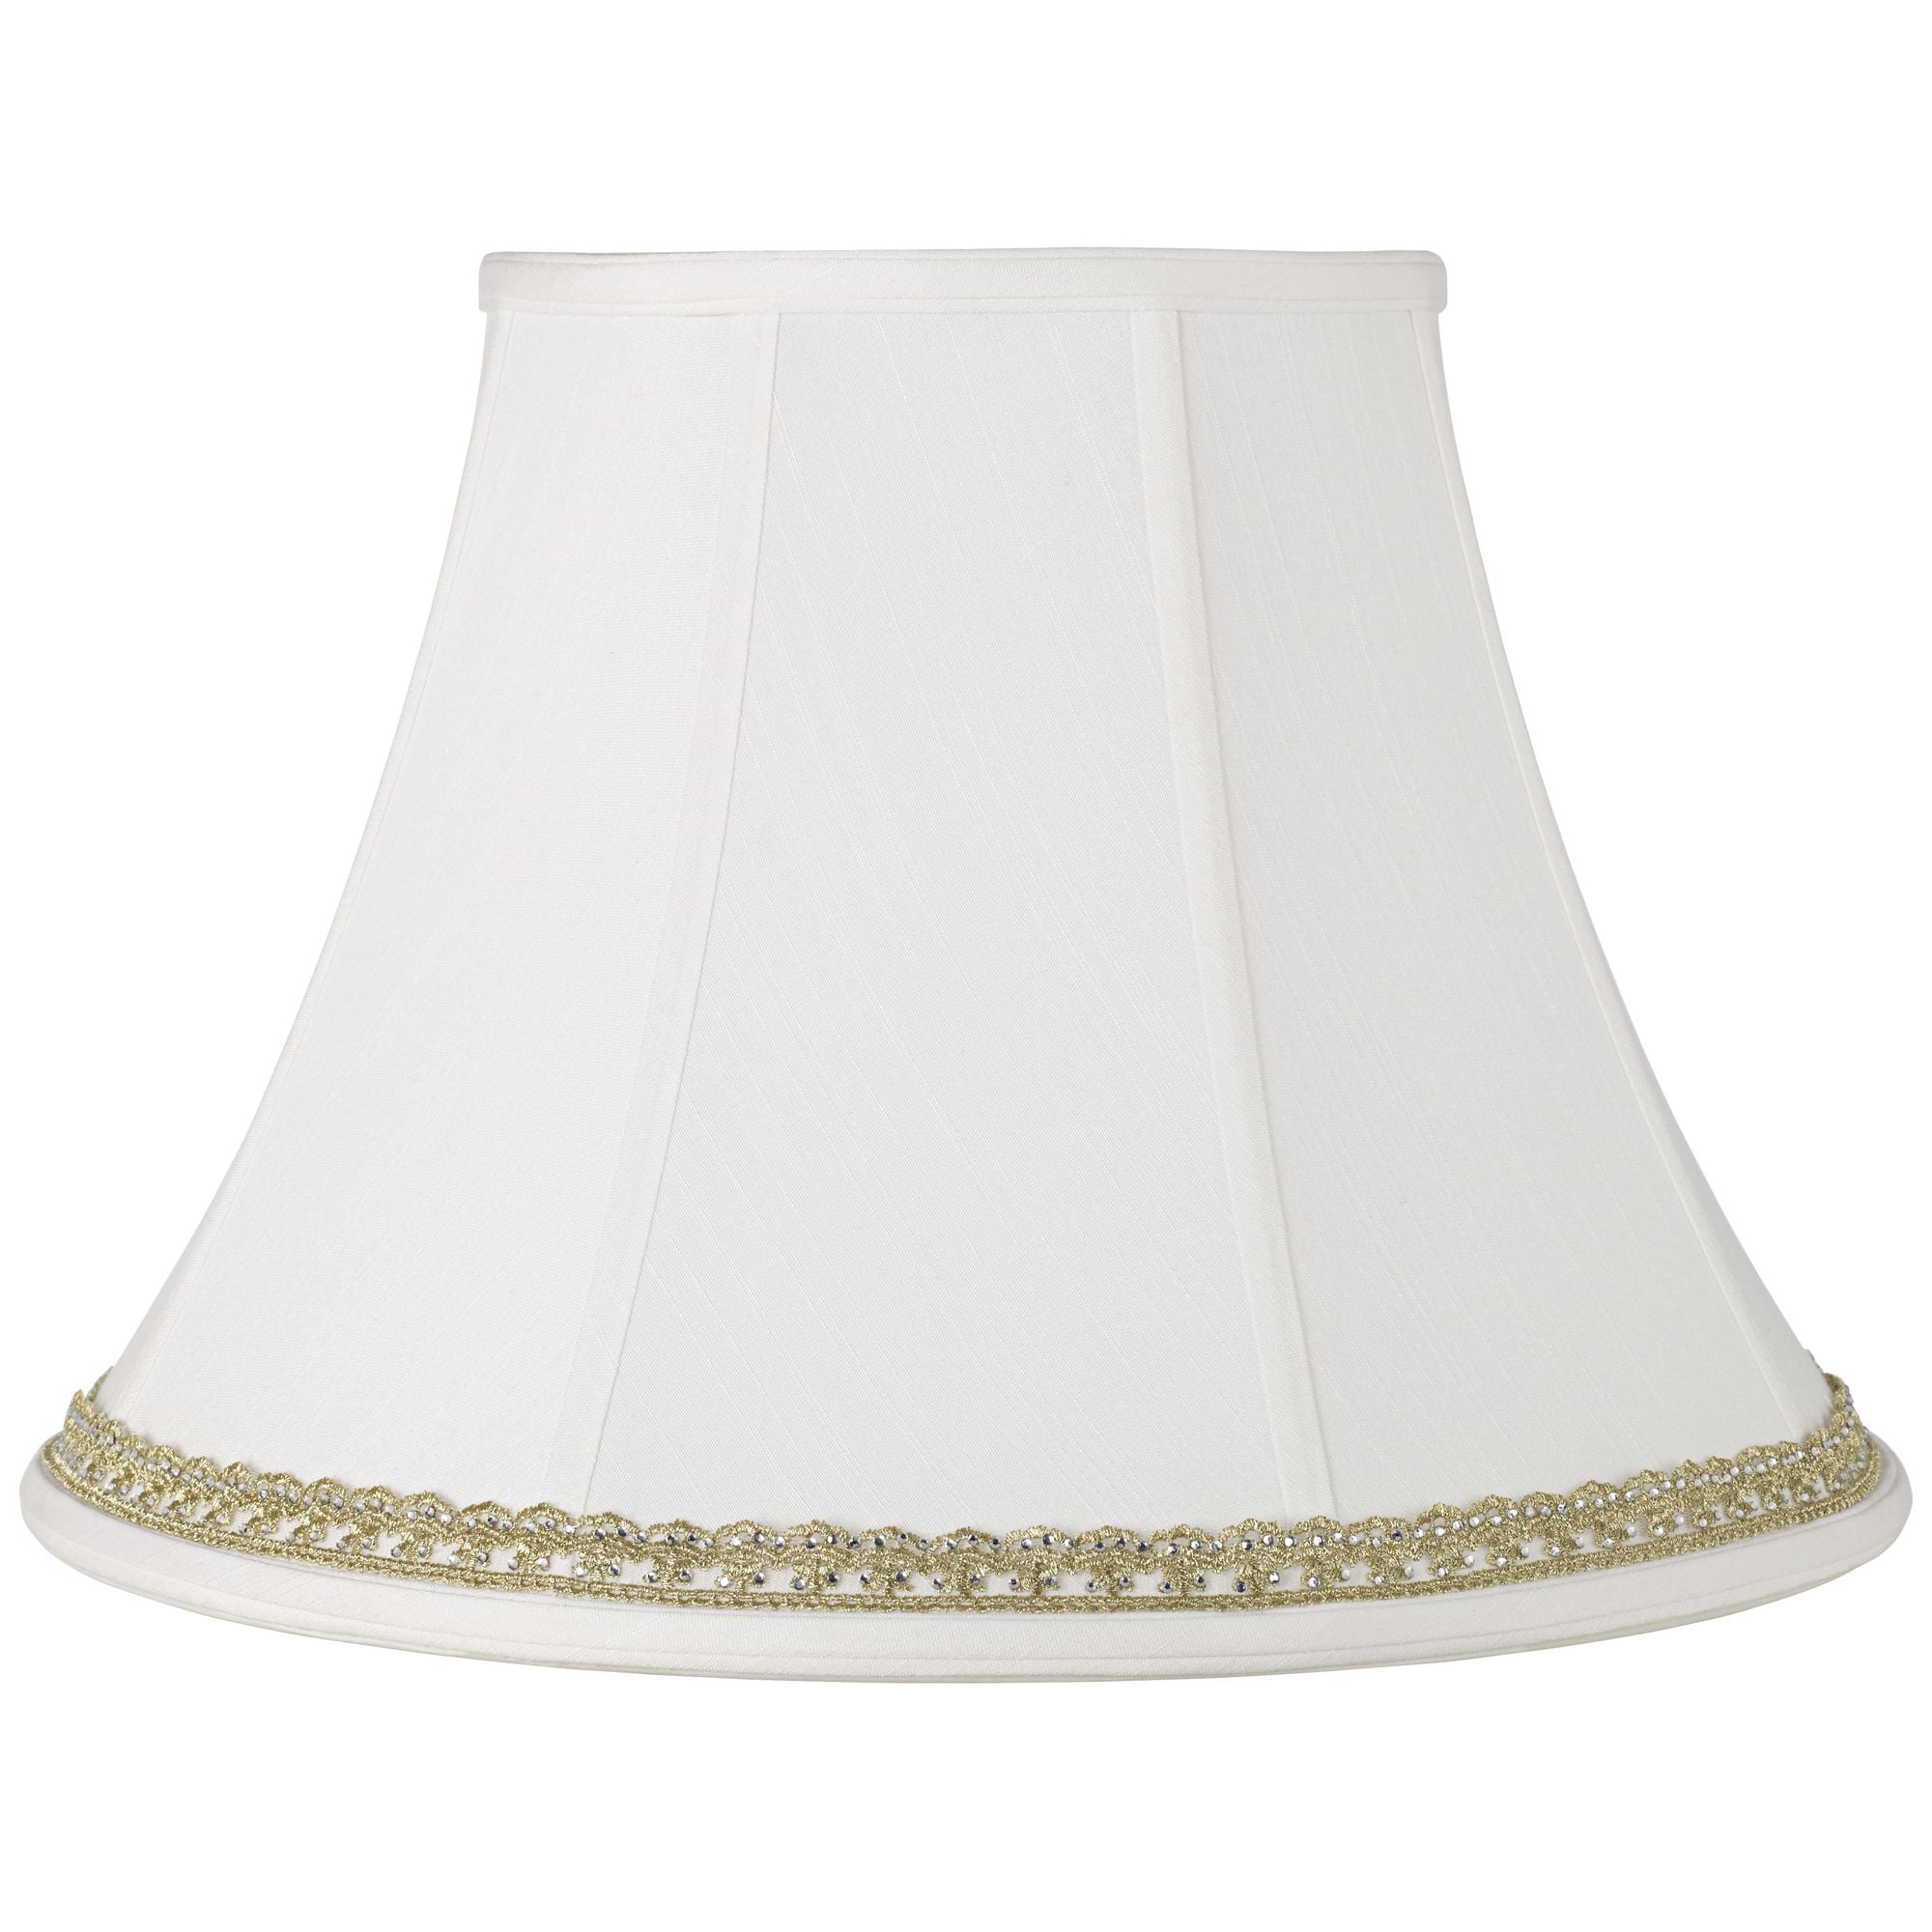 White Large Lamp Shade With Lace And, 9 Inch Lamp Shade White